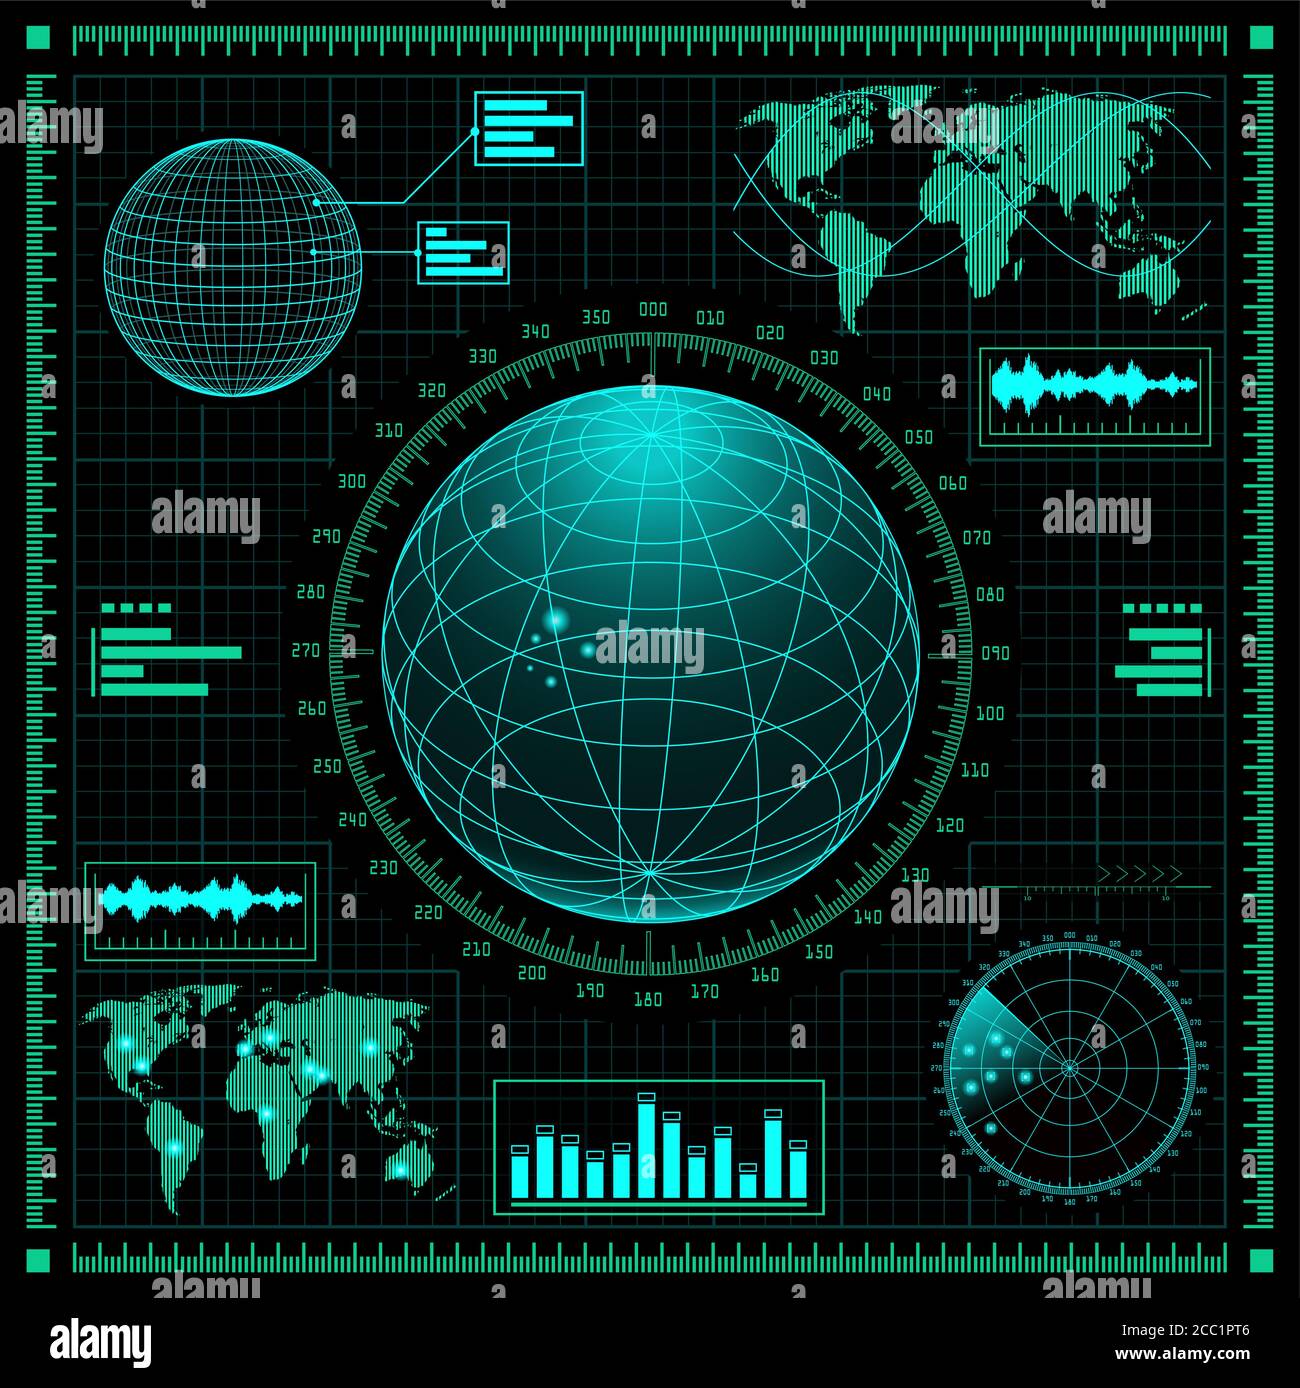 Set of futuristic graphic user interface HUD. Infographic design UI elements and radar screens. Head up display icons. Vector cyberpunk illustration. Stock Vector